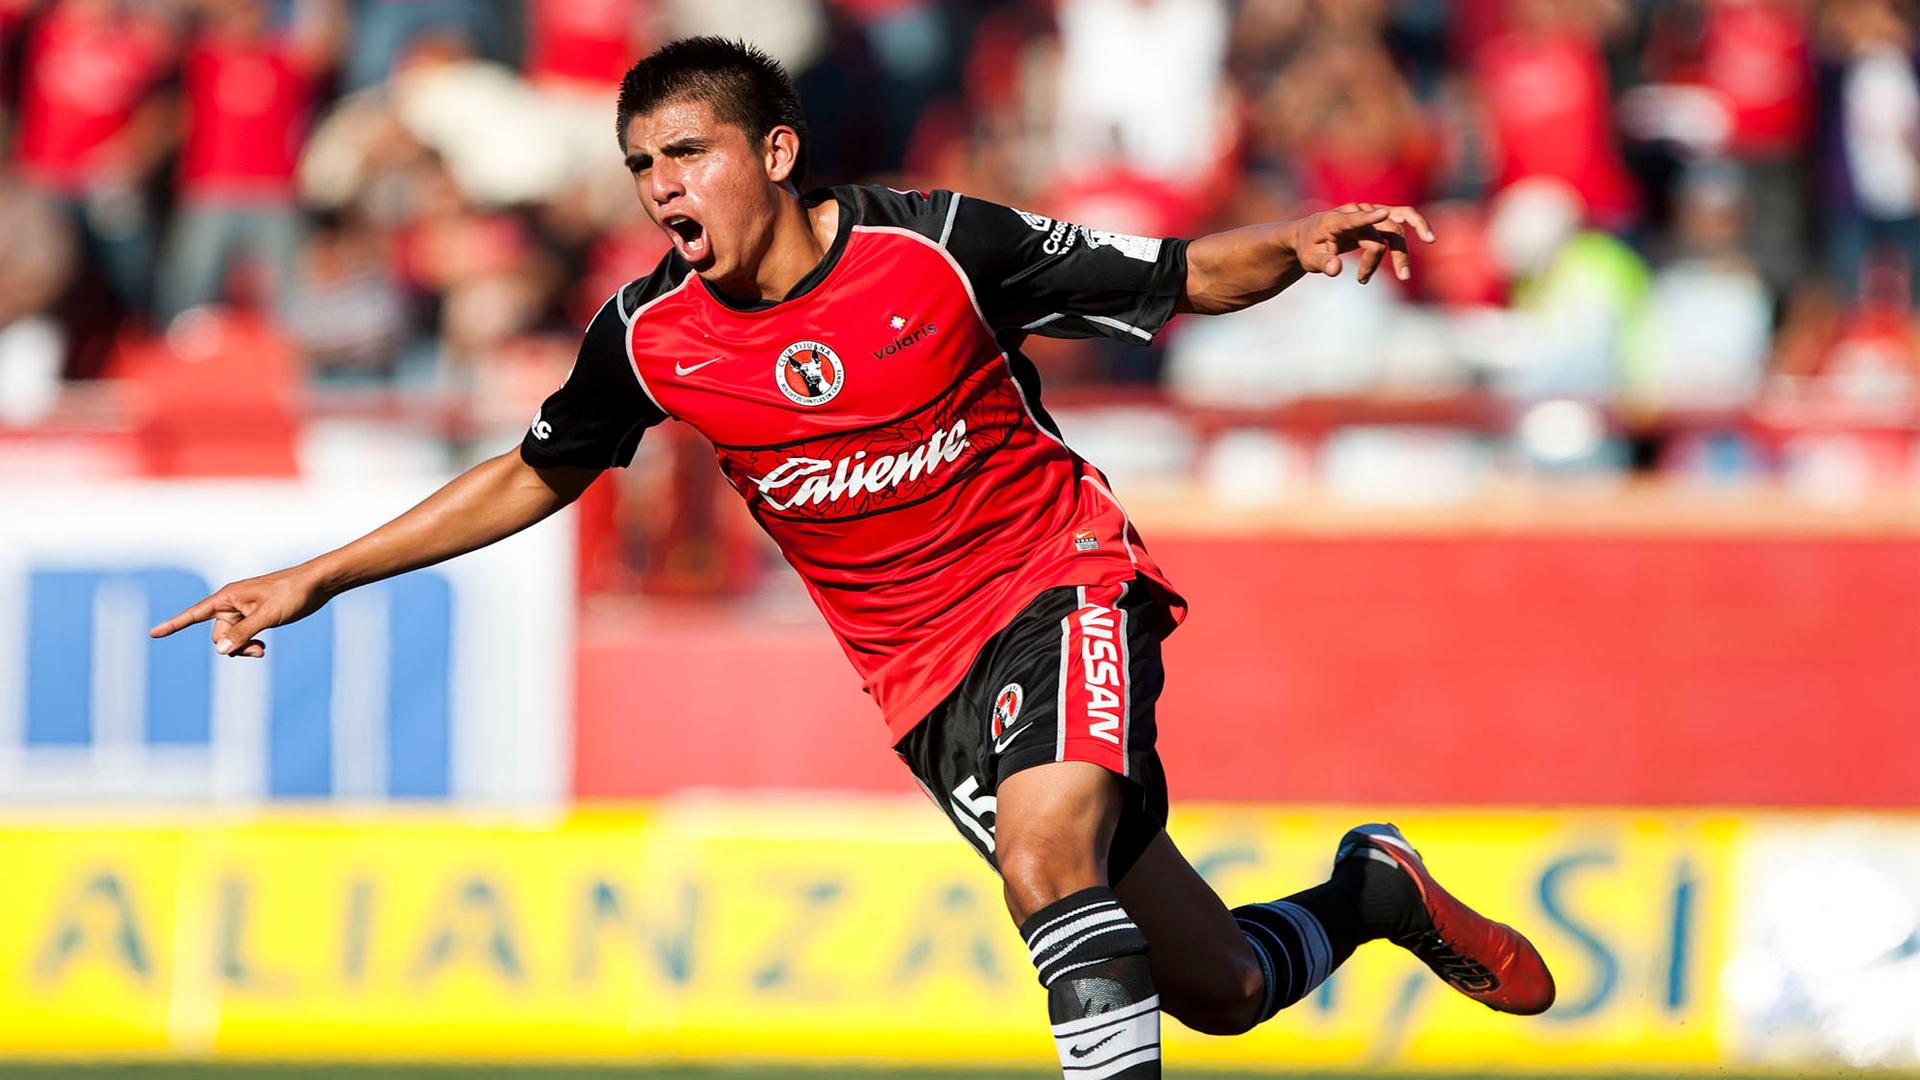 Joe Corona, 23 years old and Mexican-American, is one of the star players for the Xolos, a professional soccer team based in Tijuana, Mexico. The team is actively recruiting top soccer players from the US, and now other Mexican soccer clubs are following 